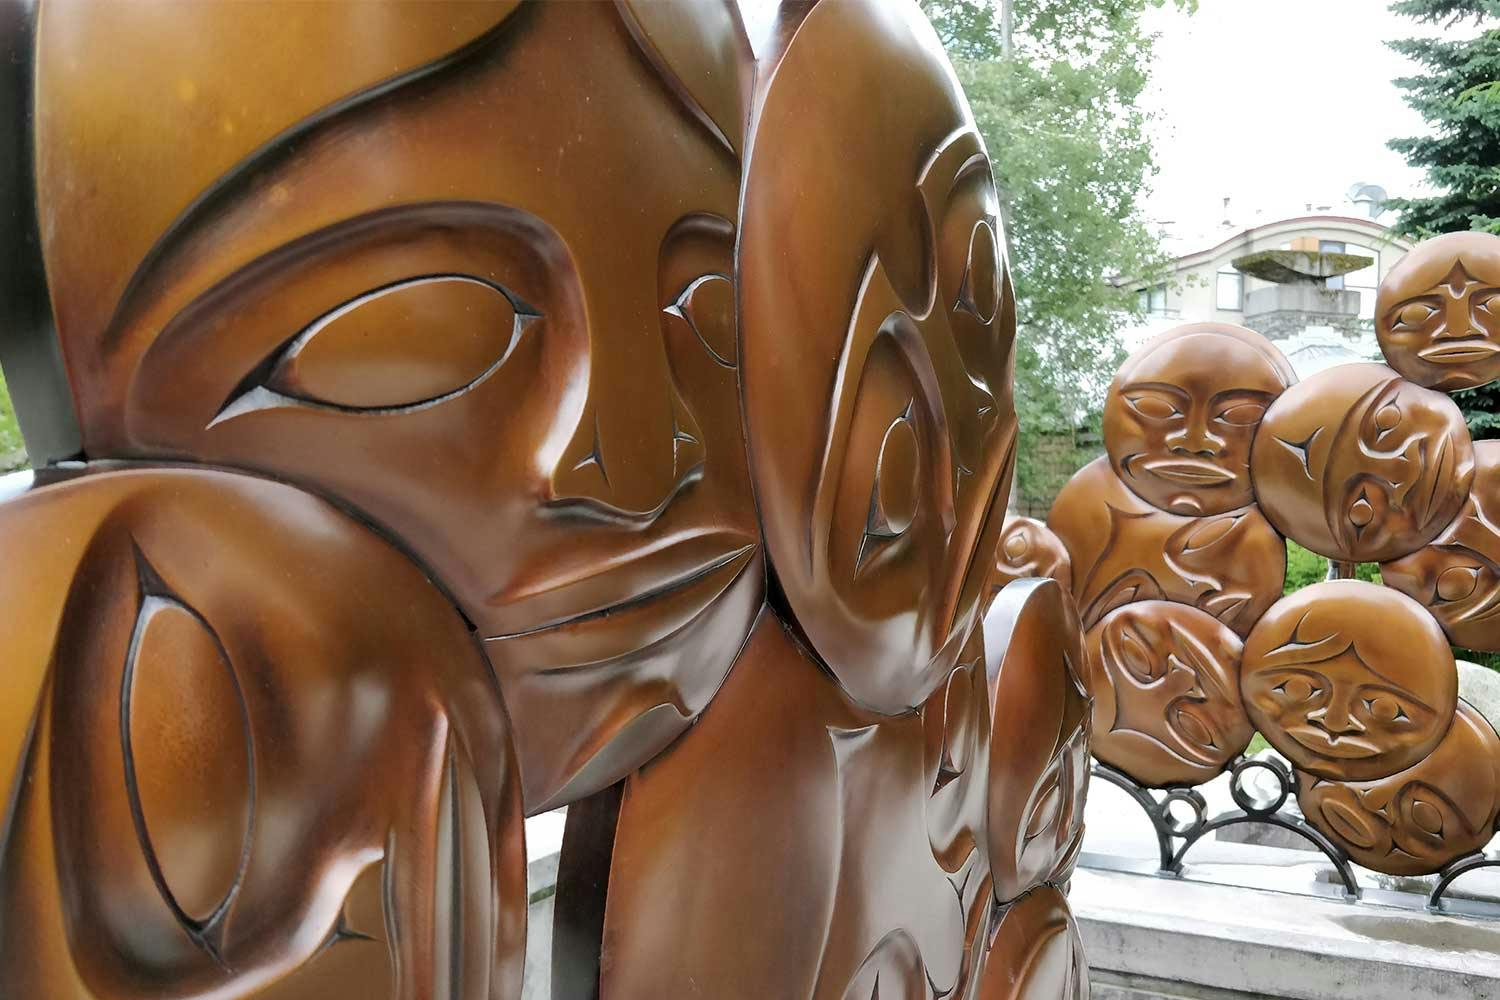 A bronze sculpture in the Northwest Coast style of circular faces overlapping each other in Whistler, BC.